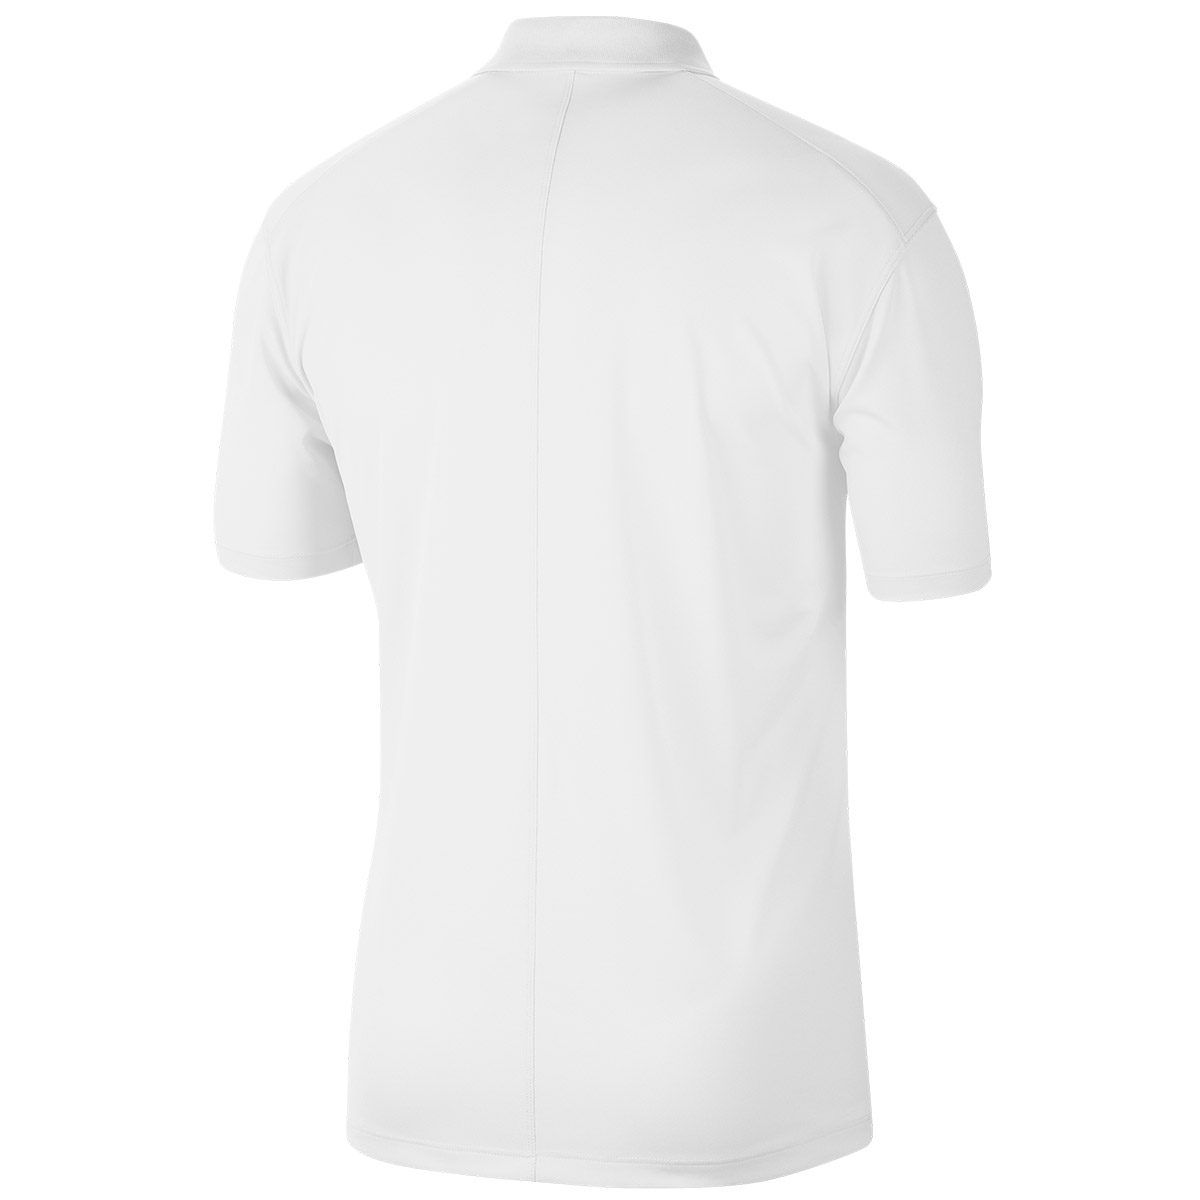 Nike Men's Dri-FIT Victory Solid Golf Polo Shirt from american golf